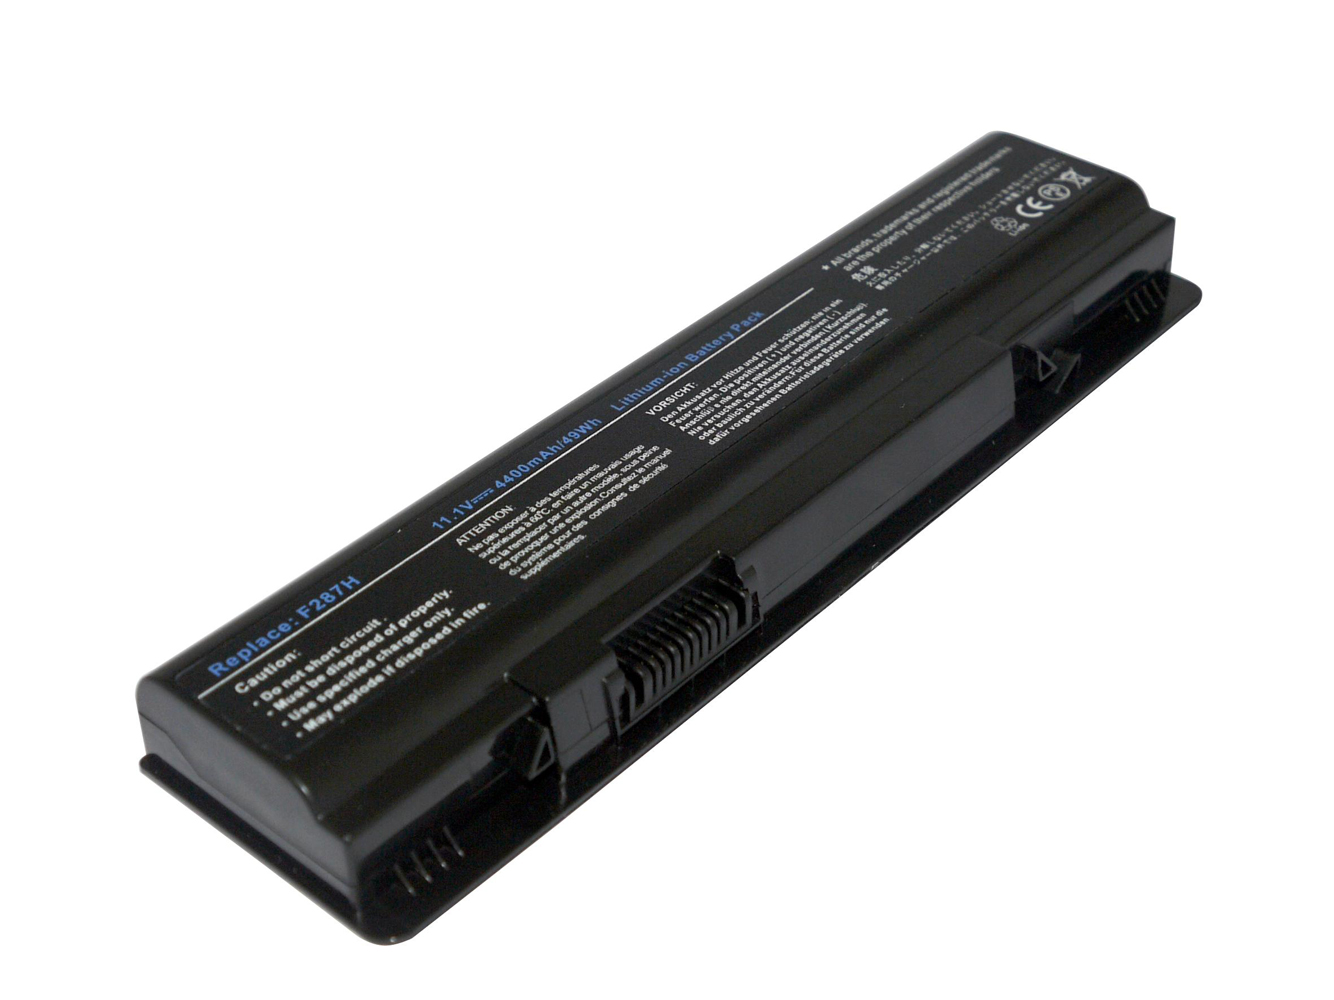 312-0818, 451-10673 replacement Laptop Battery for Dell Inspiron 1410, Vostro 1014, 4400mAh, 11.10V